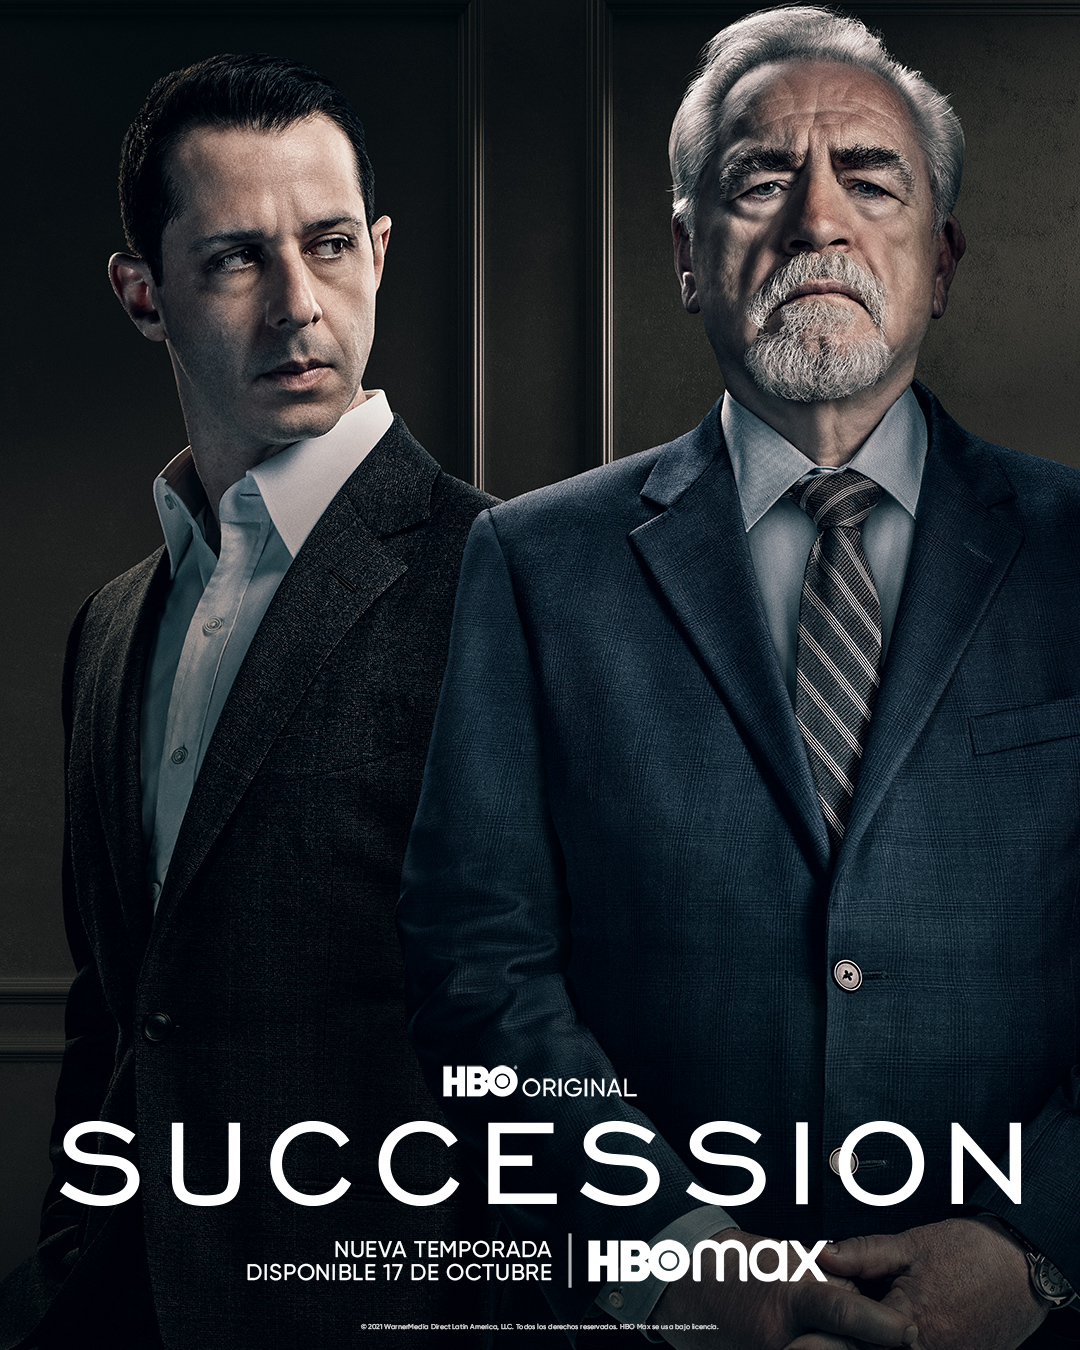 SUCCESSION CHARACTERS